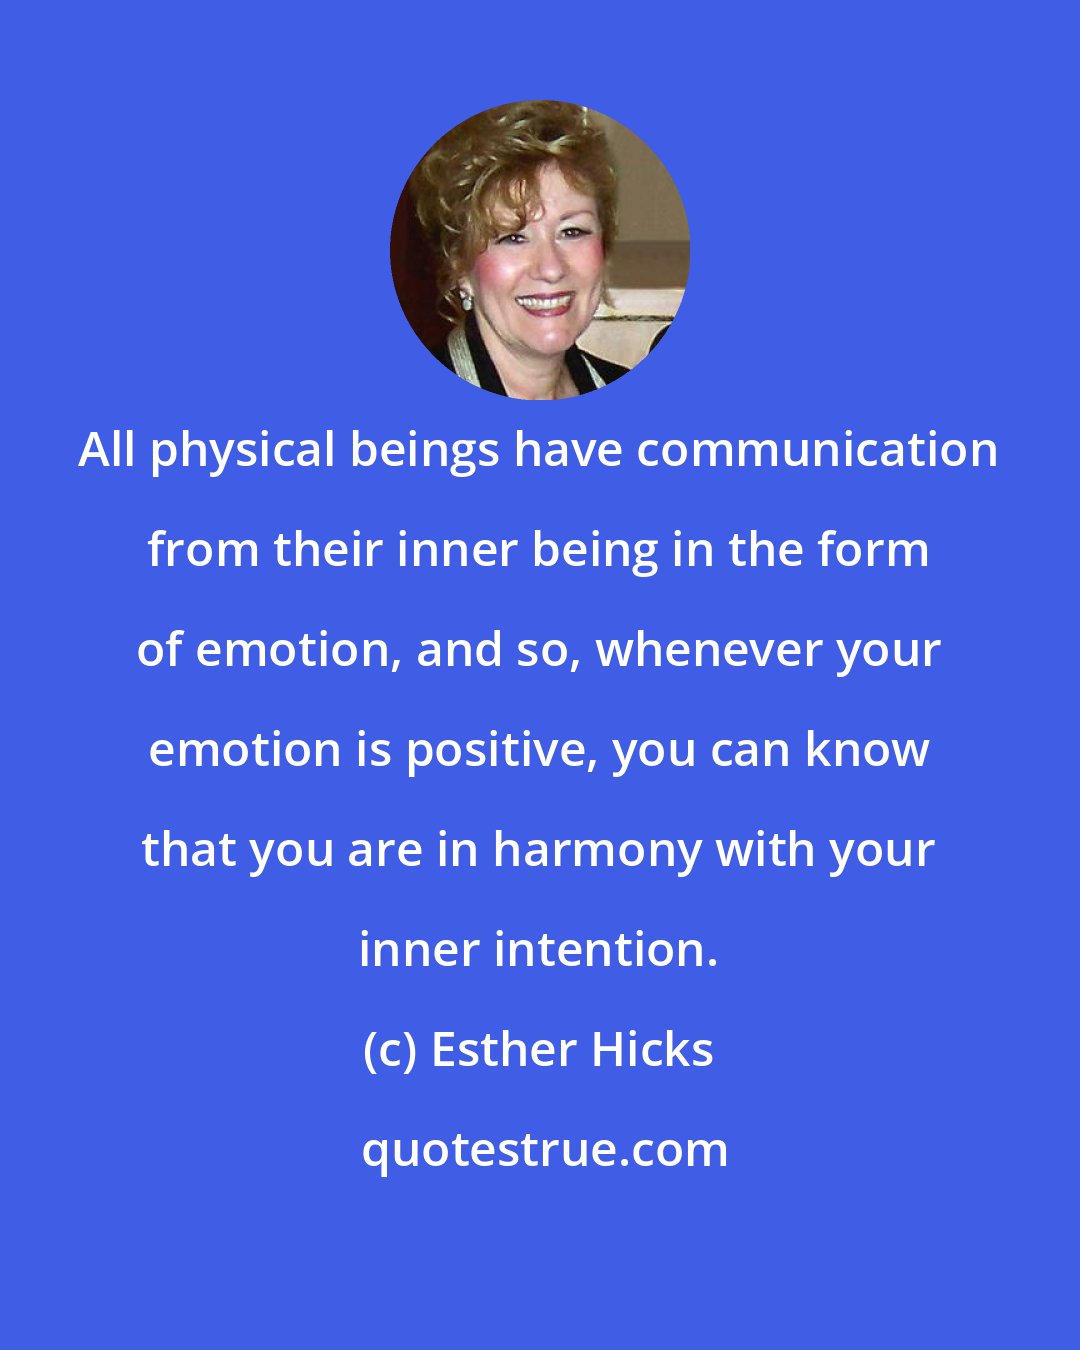 Esther Hicks: All physical beings have communication from their inner being in the form of emotion, and so, whenever your emotion is positive, you can know that you are in harmony with your inner intention.